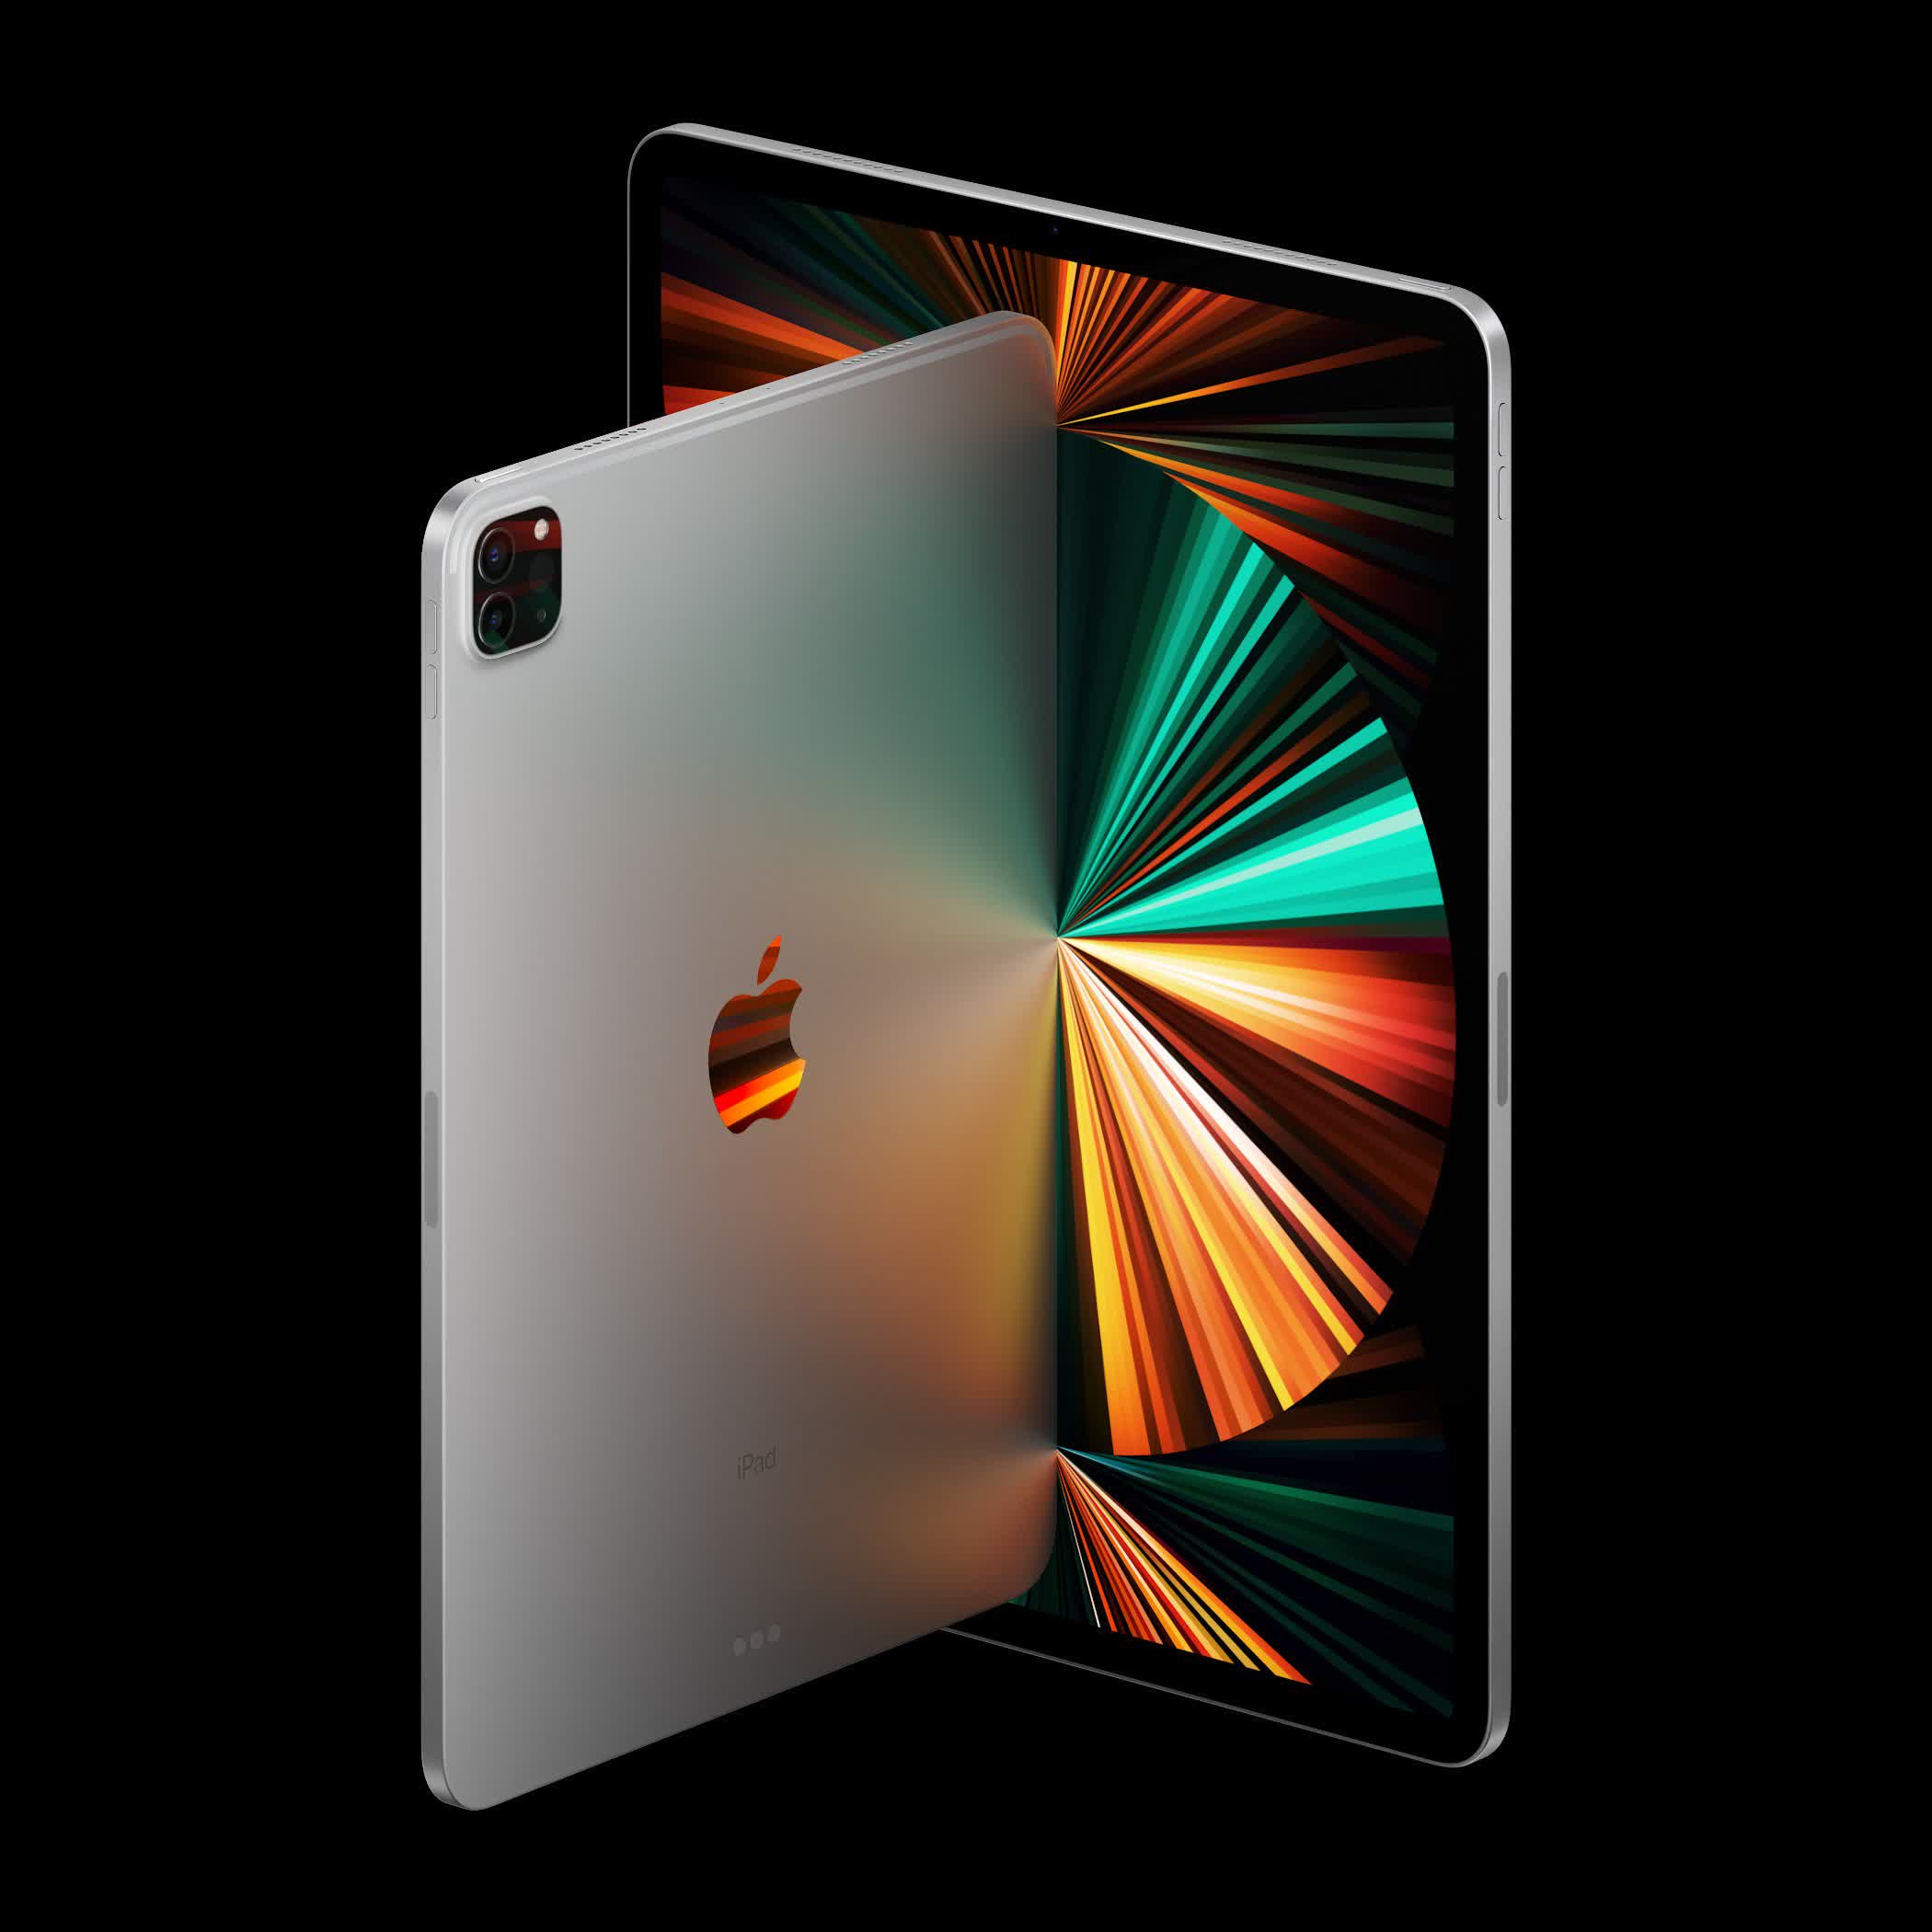 Apple's new M1-equipped iPad Pros arrive in late May